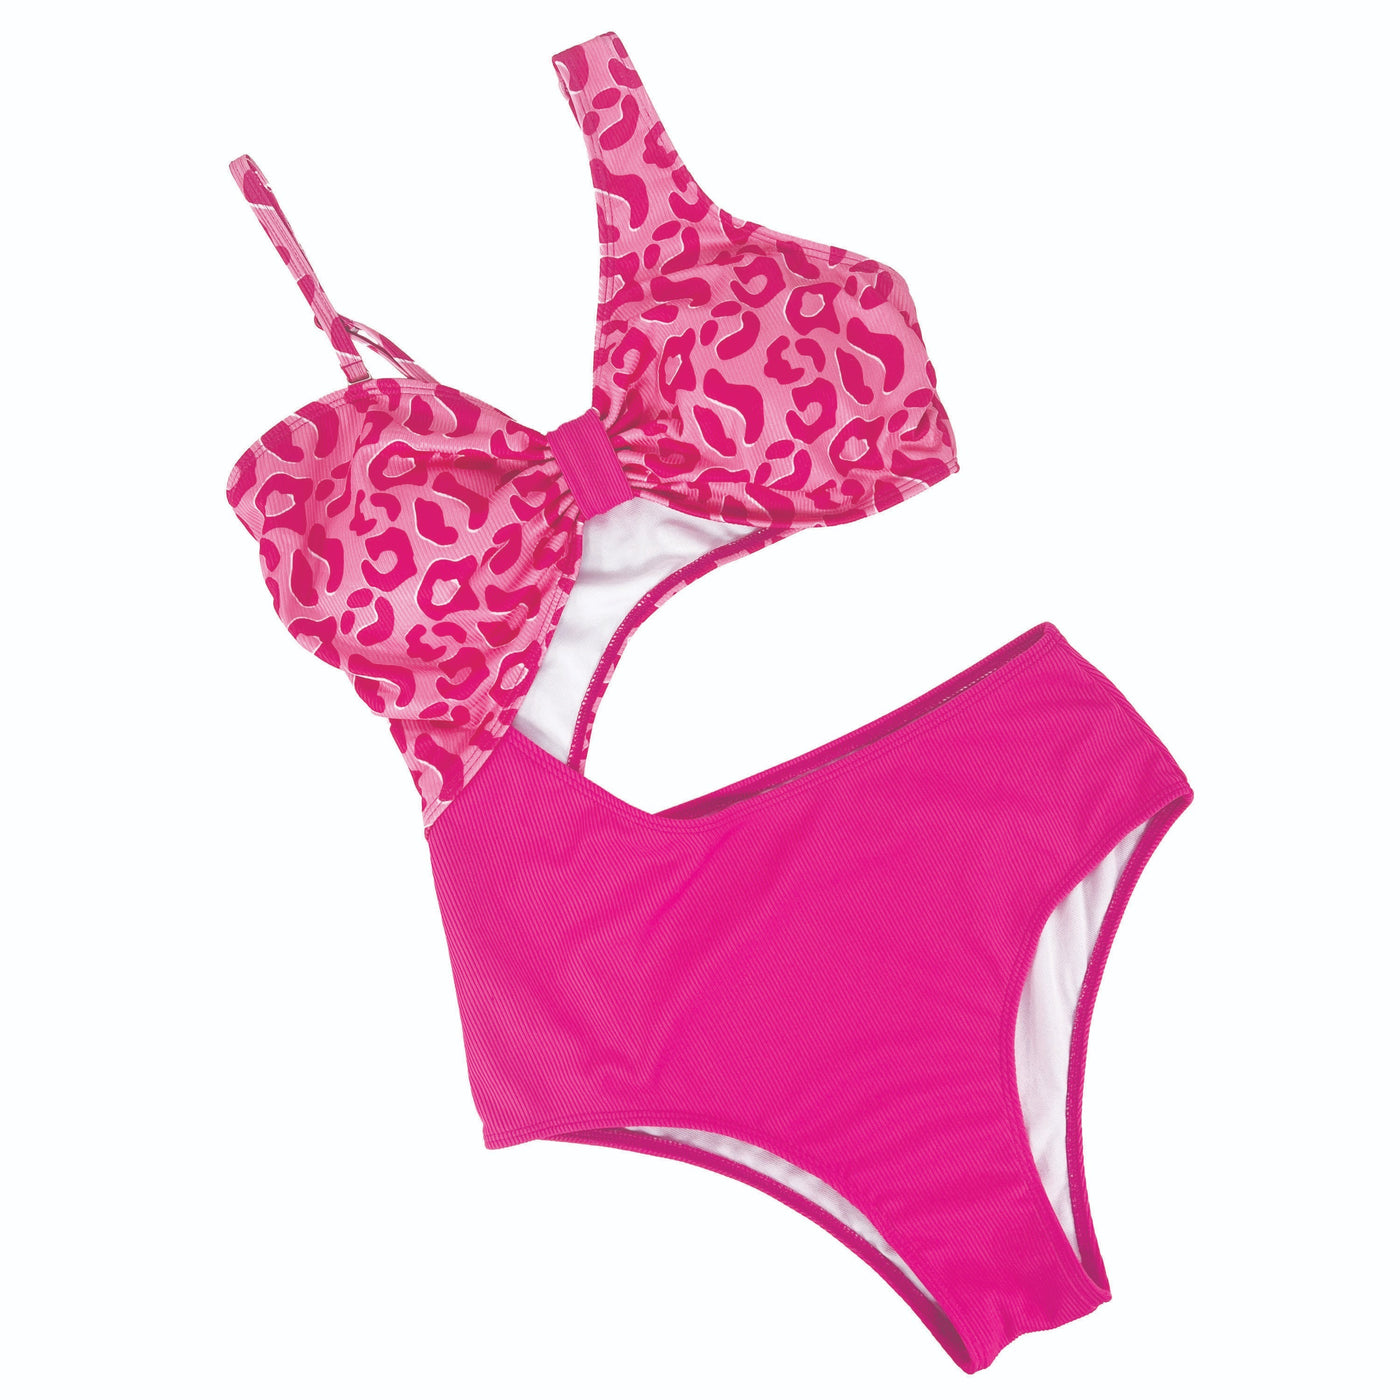 Pink leopard one piece side cut out swimming suit